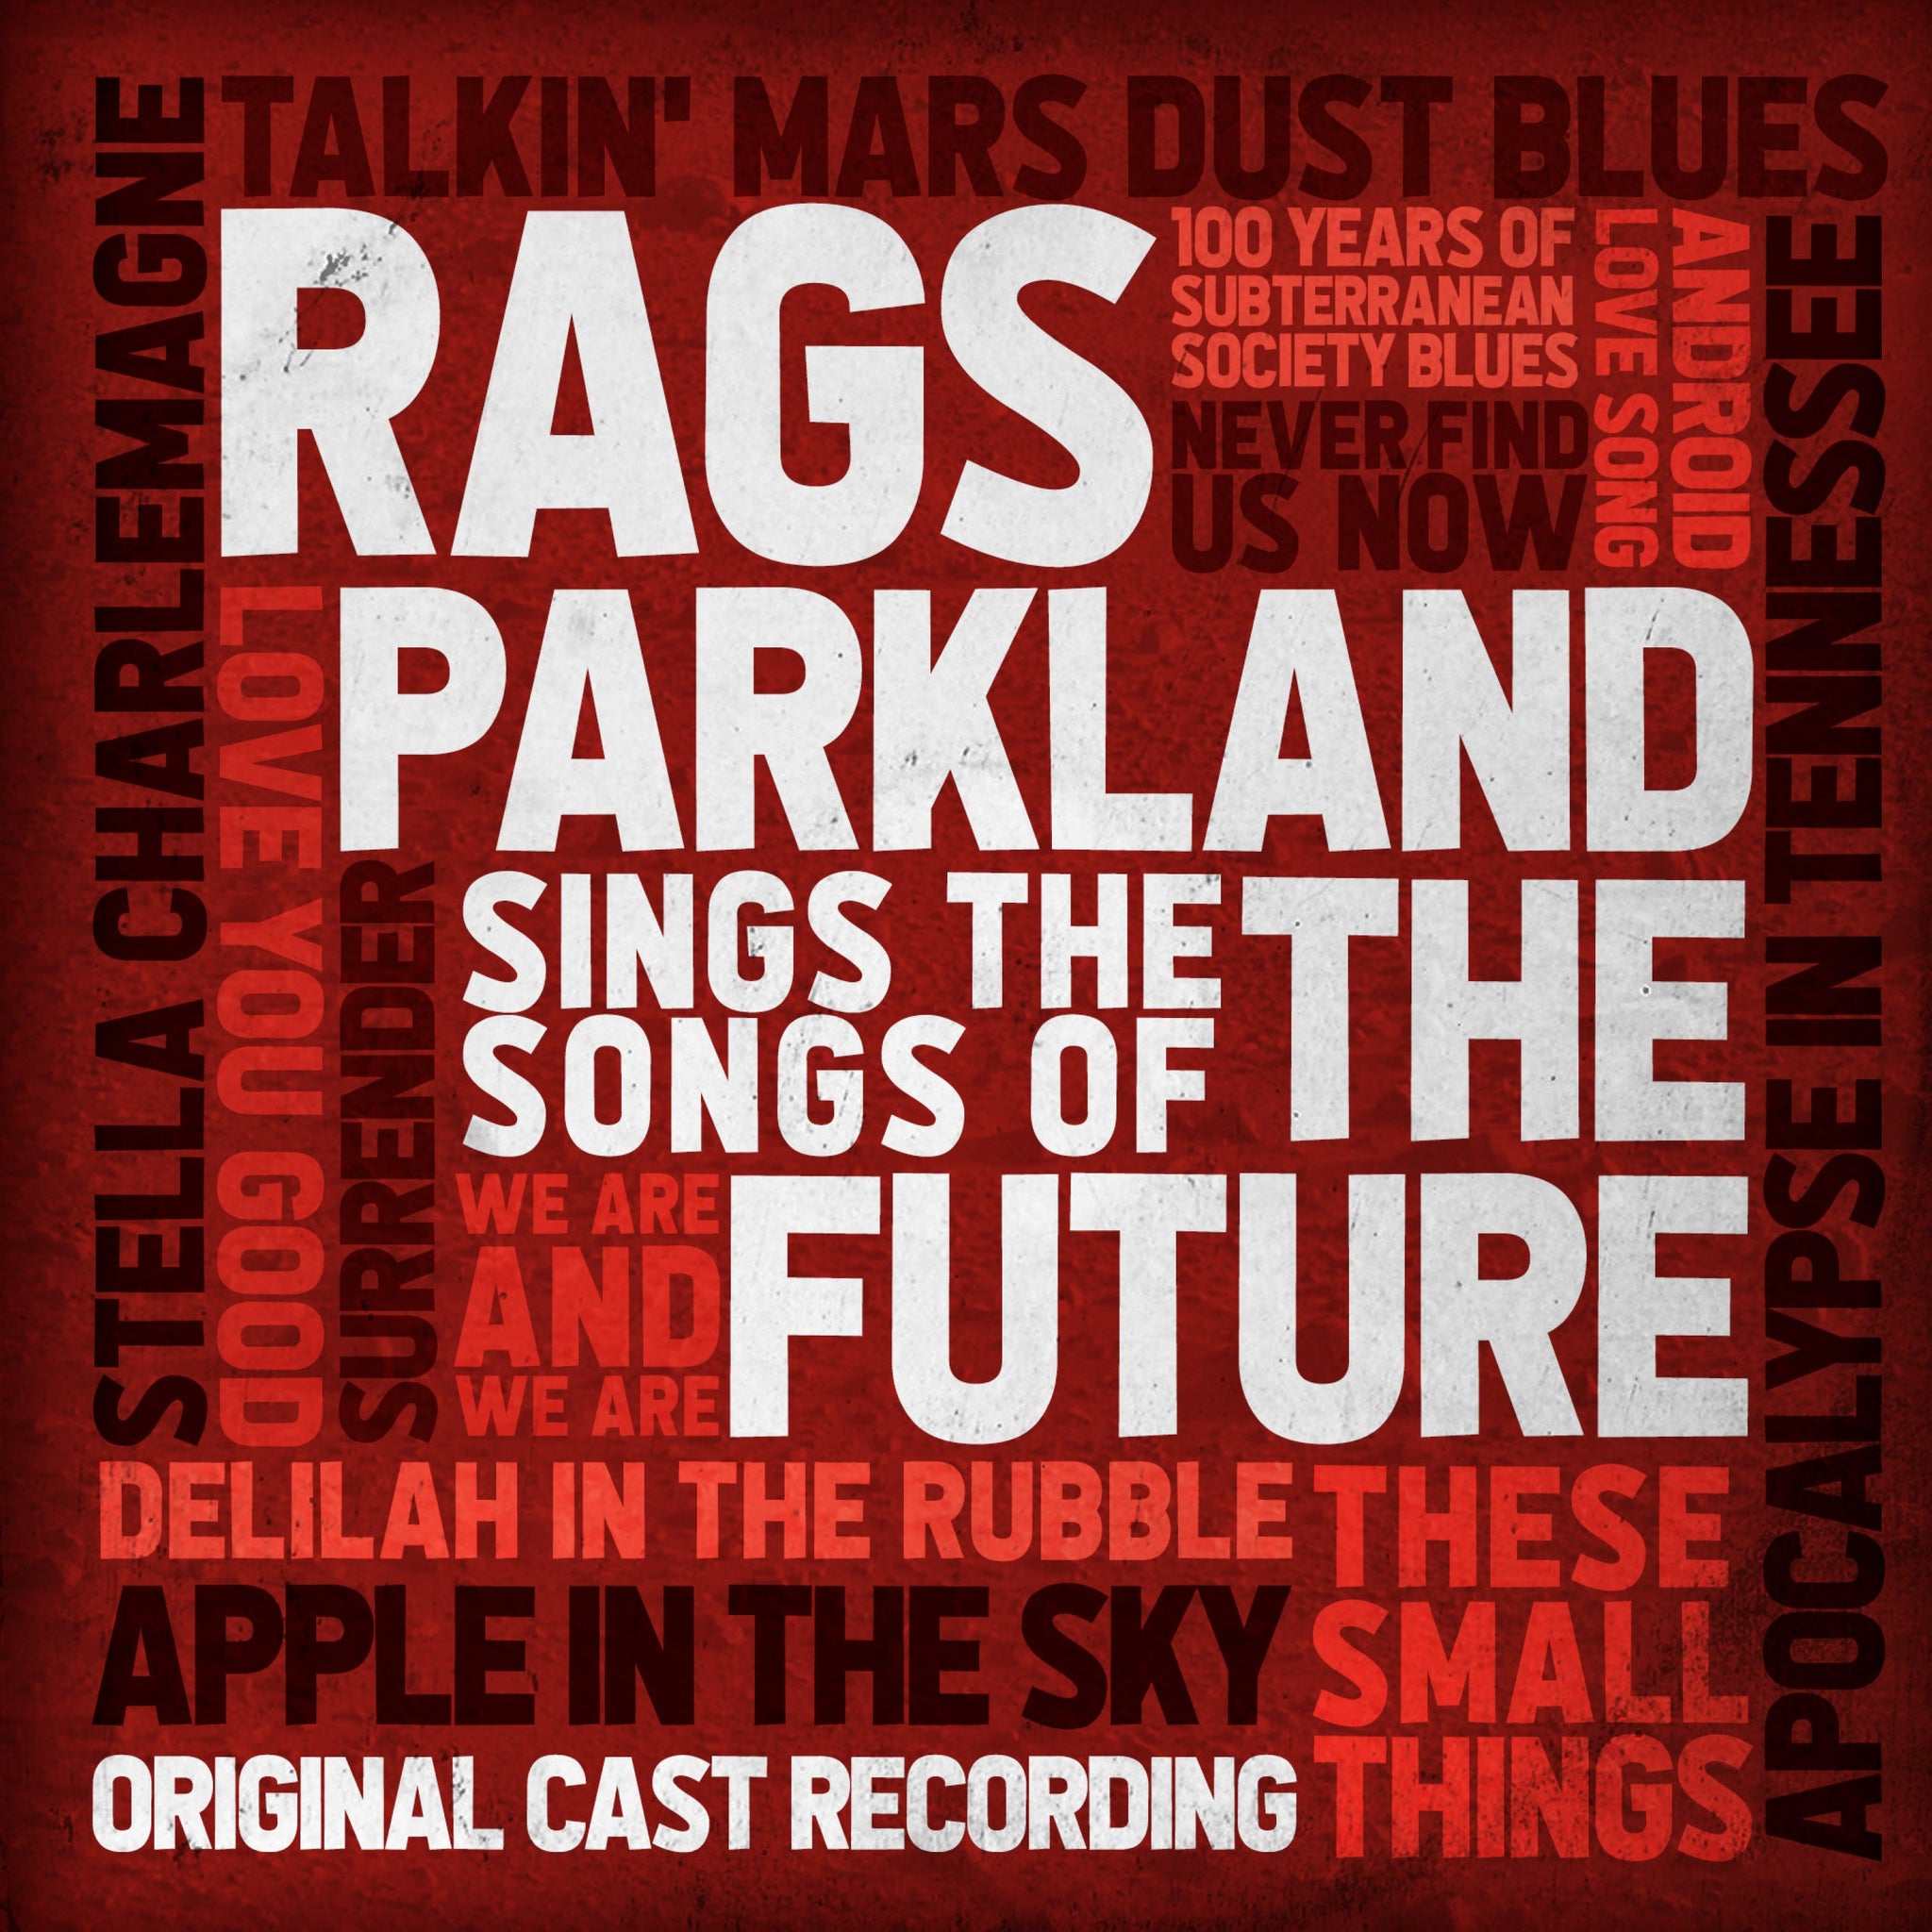 Rags Parkland Sings the Songs of The Future (Original Cast Recording) [MP3]